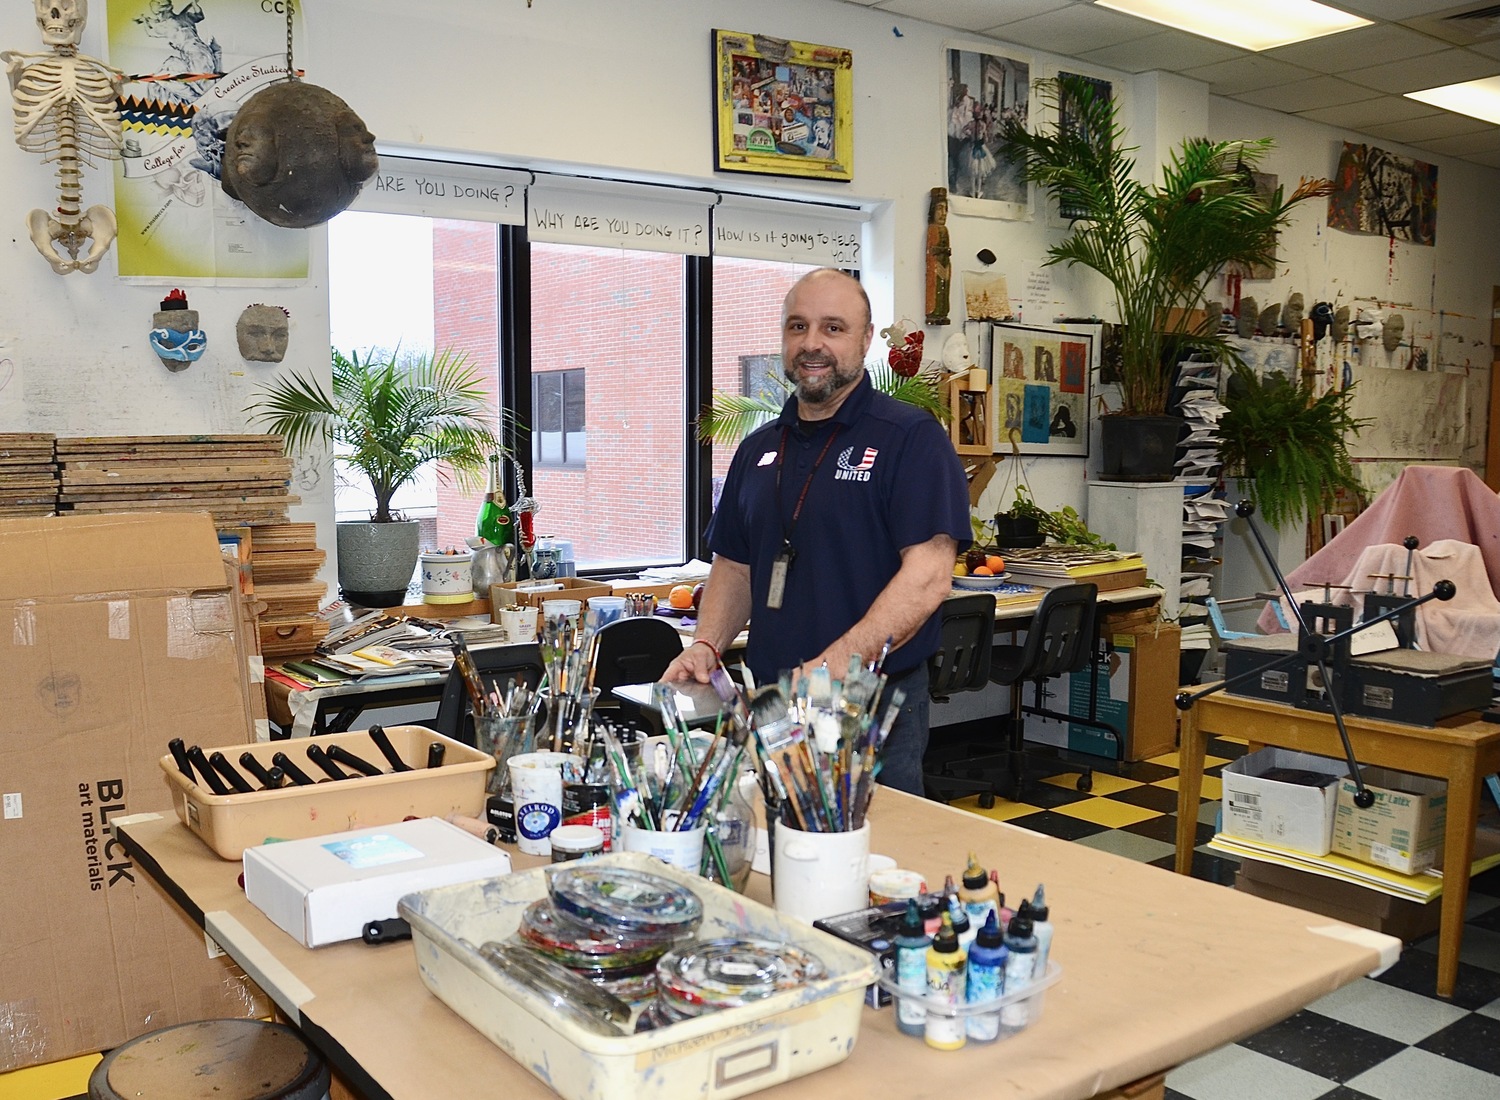 Pierson art teacher Joe Bartolotto said his negative interactions with students have gone down 90 percent since the school adopted the Yondr system, which prevents students from accessing their cellphones during the school day. KYRIL BROMLEY